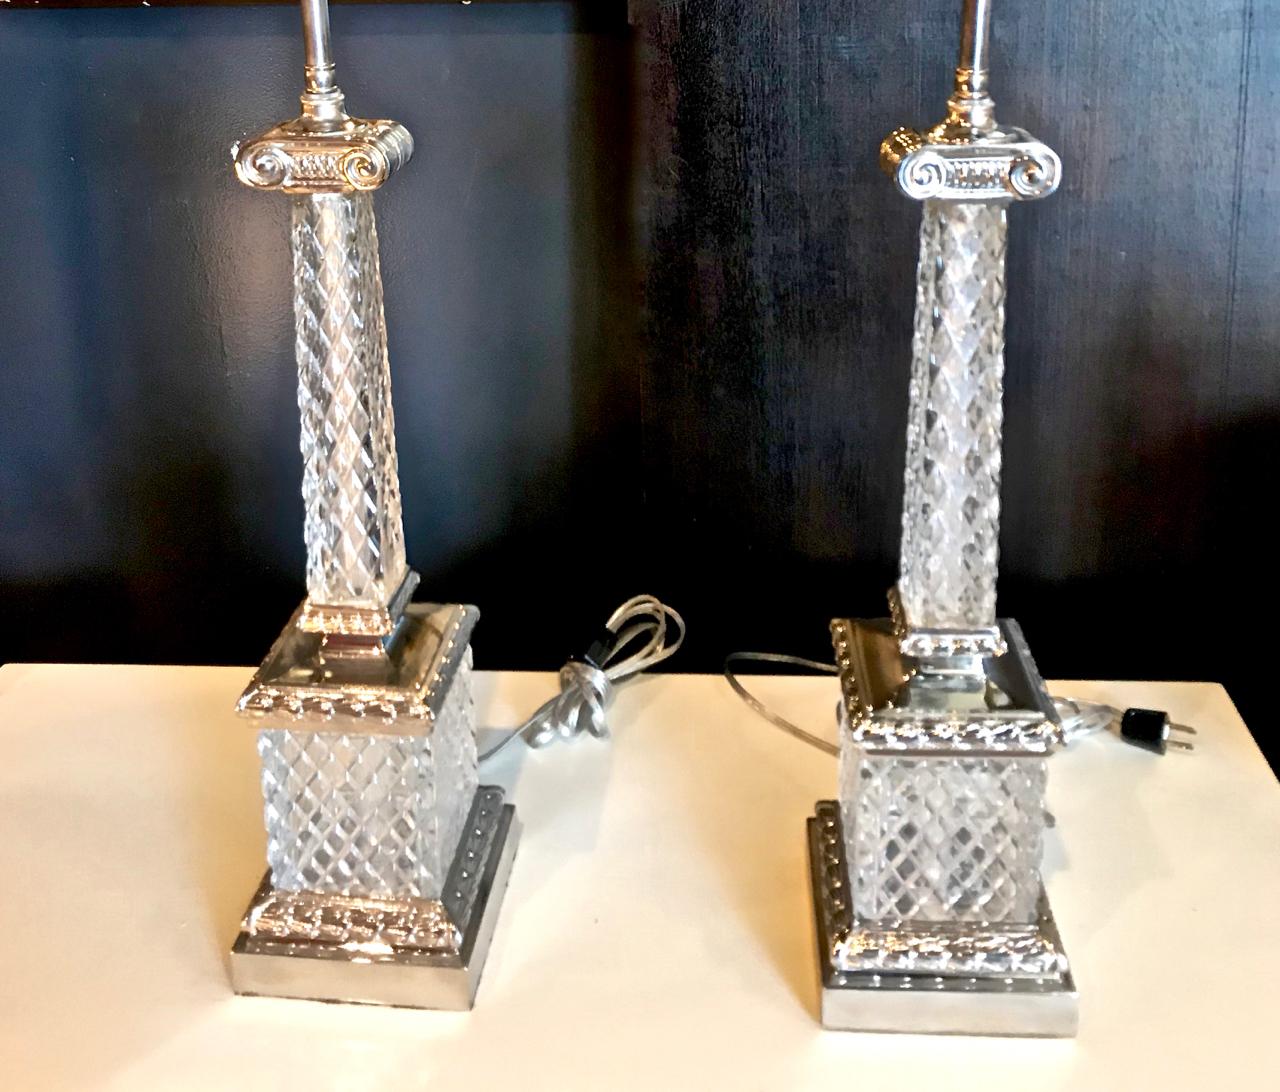 This is a stunning pair of Marbro style cut crystal Ionic column-form lamps that dates to circa 1960. The cut crystal columns are adorned with polished nickel accents brass ionic scrolls and sit on cut crystal and polished nickels plinths. The lamps